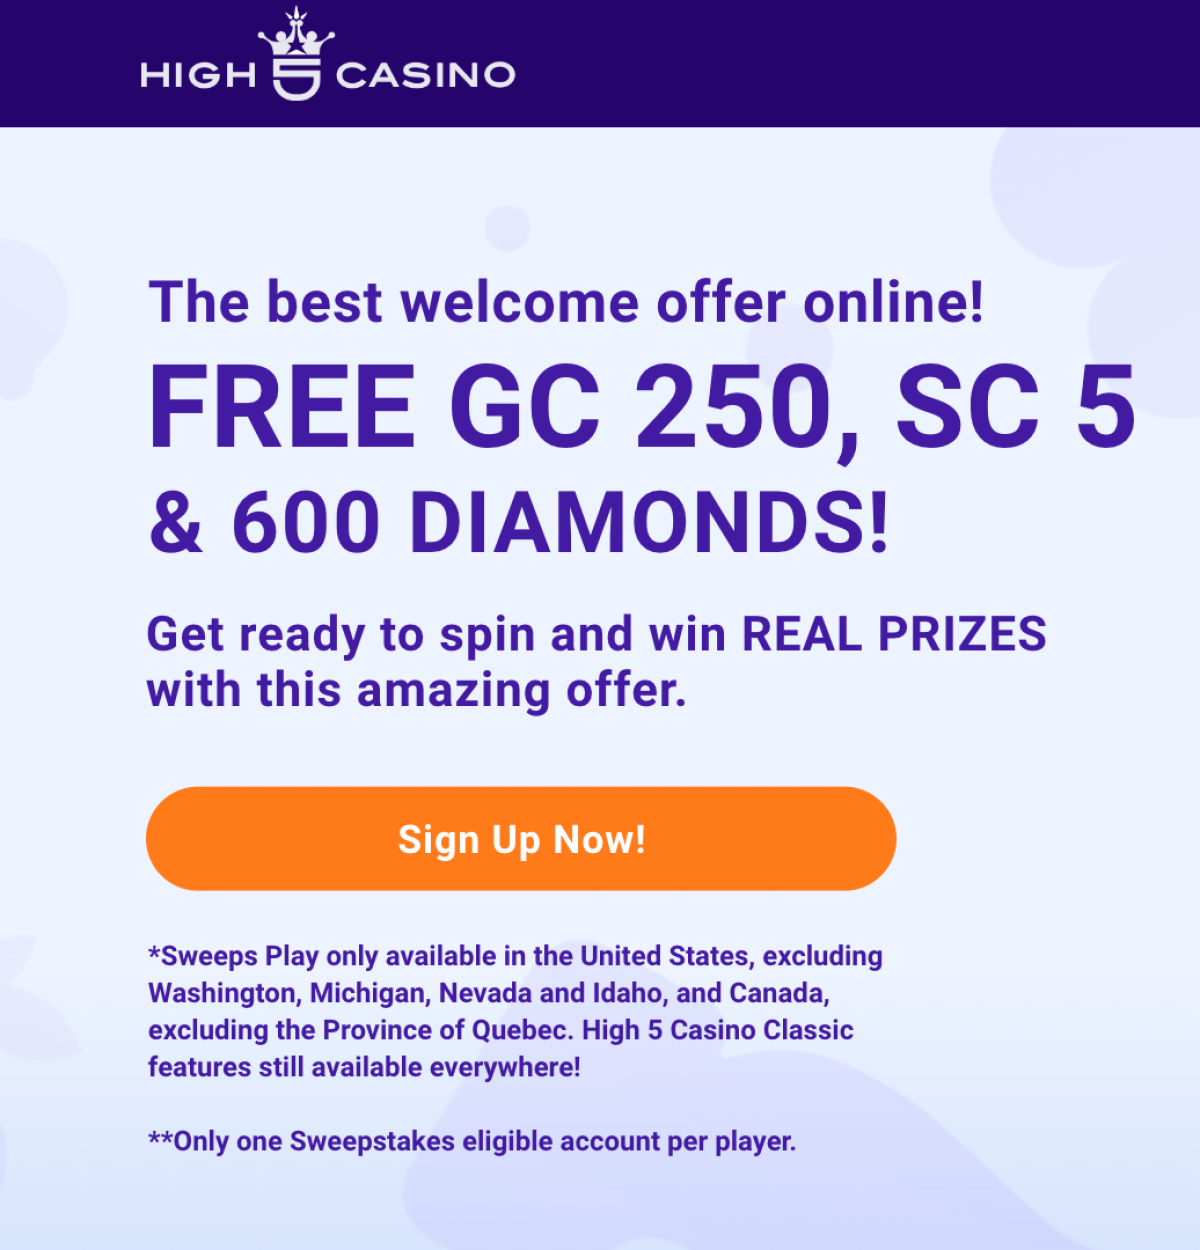 high 5 casino sign up now